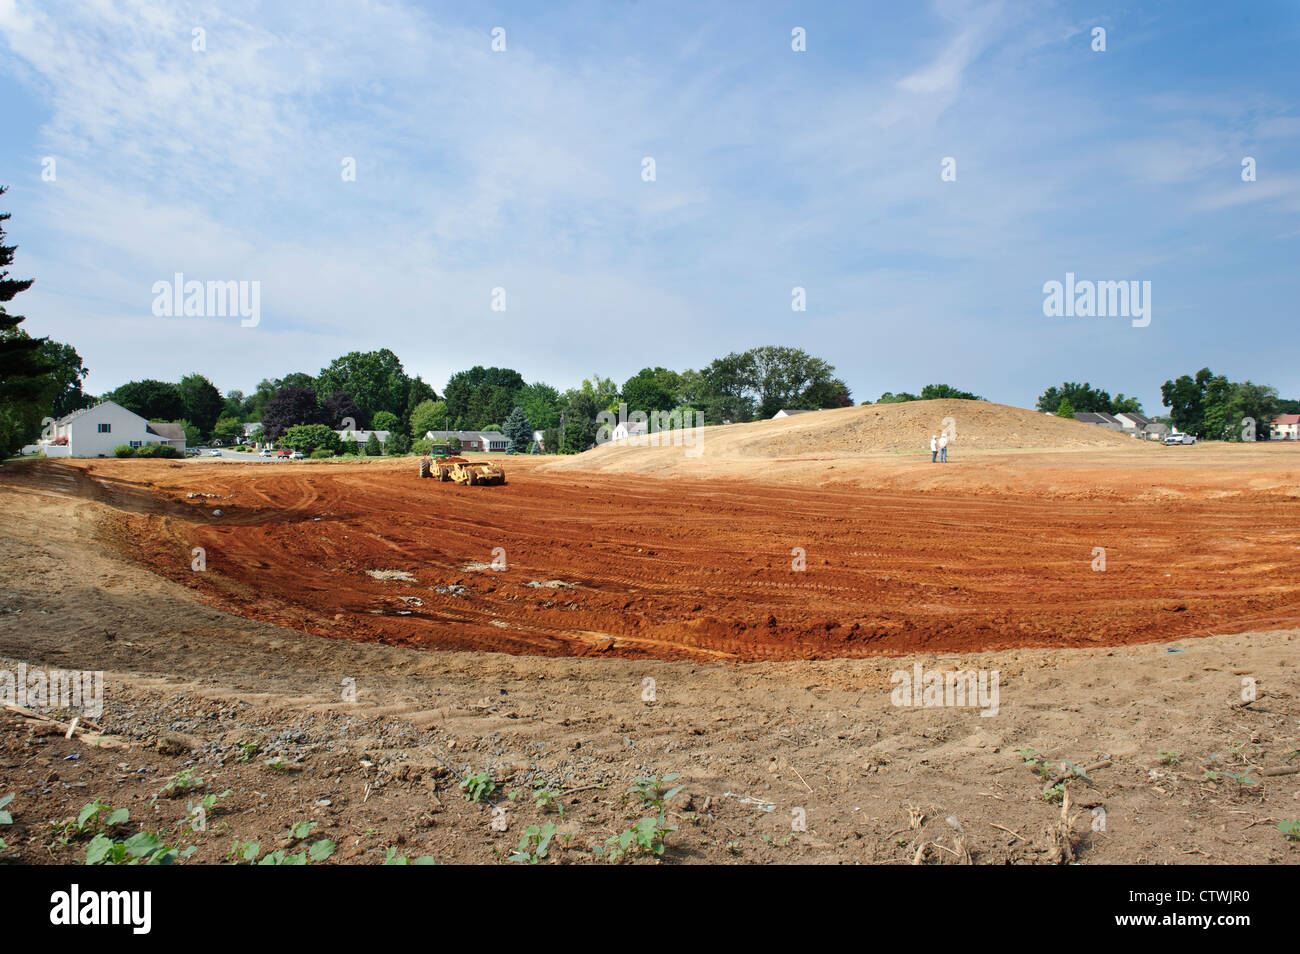 CONSTRUCTION OF SETTLING BASIN ON CONSTRUCTION SITE Stock Photo